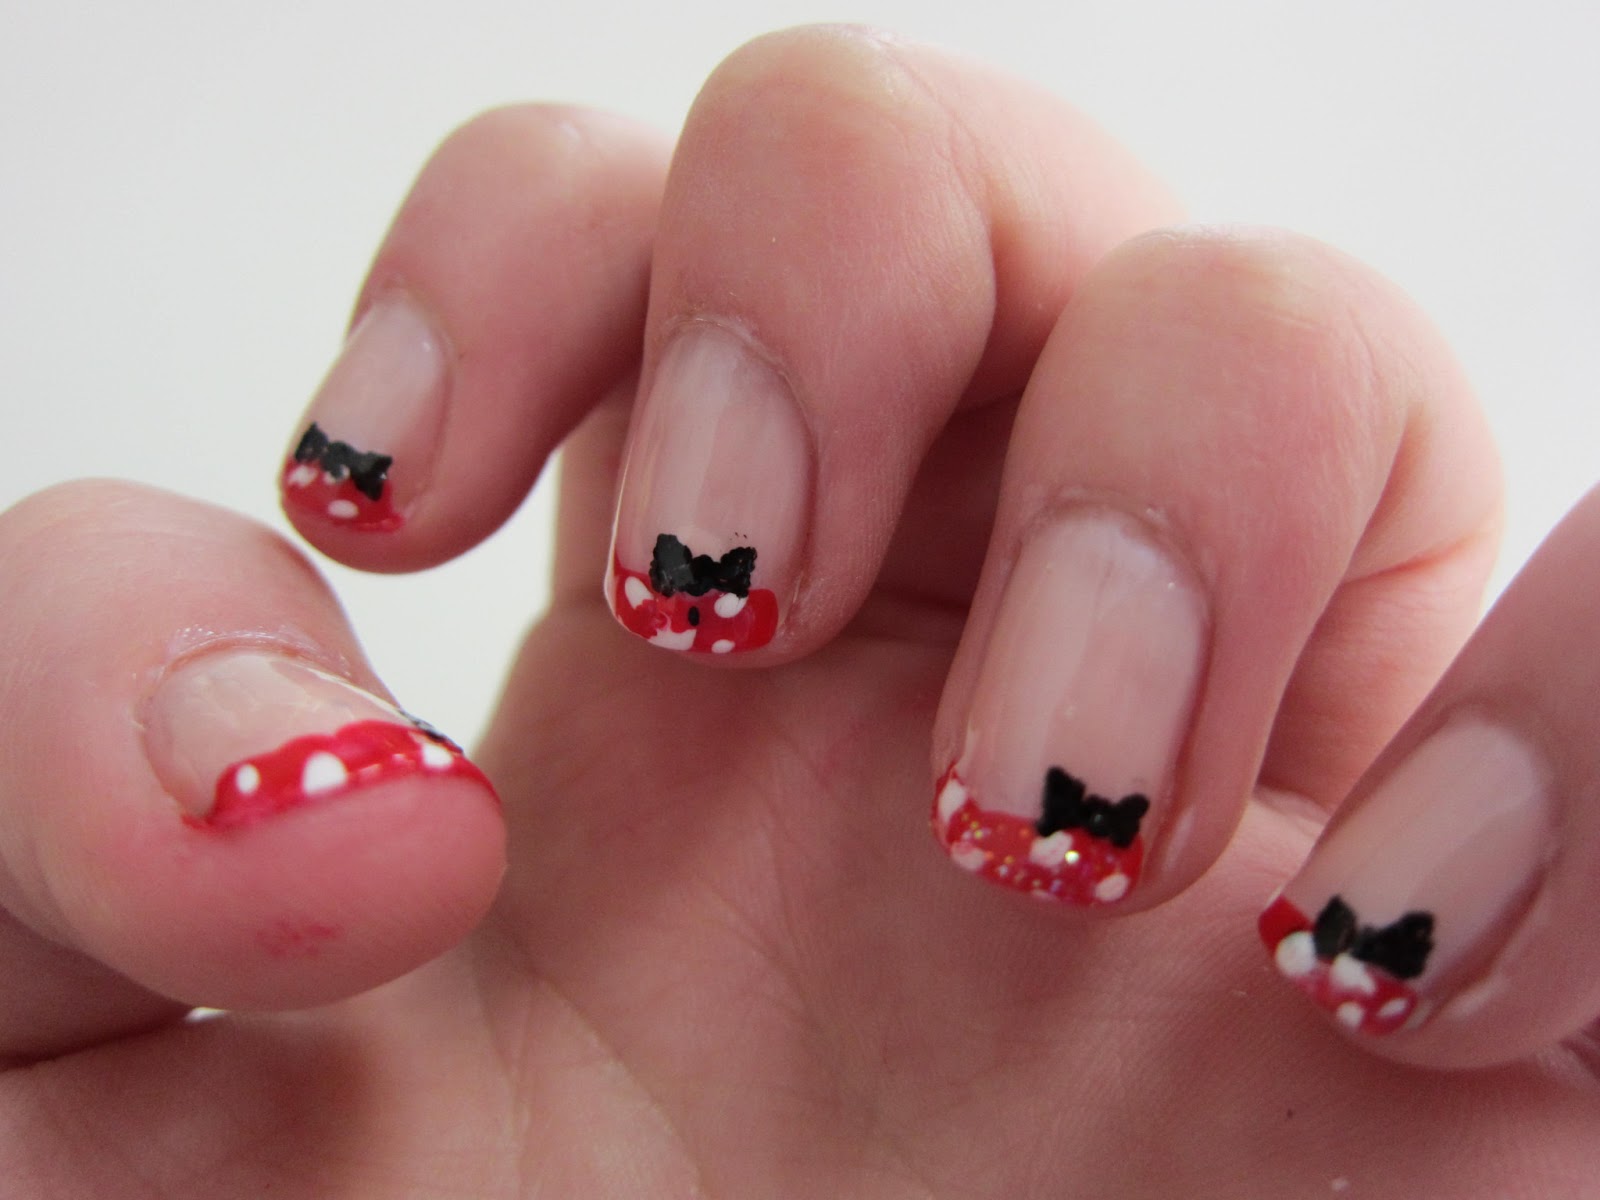 4. Minnie Mouse Gel Nail Designs for Short Nails - wide 5